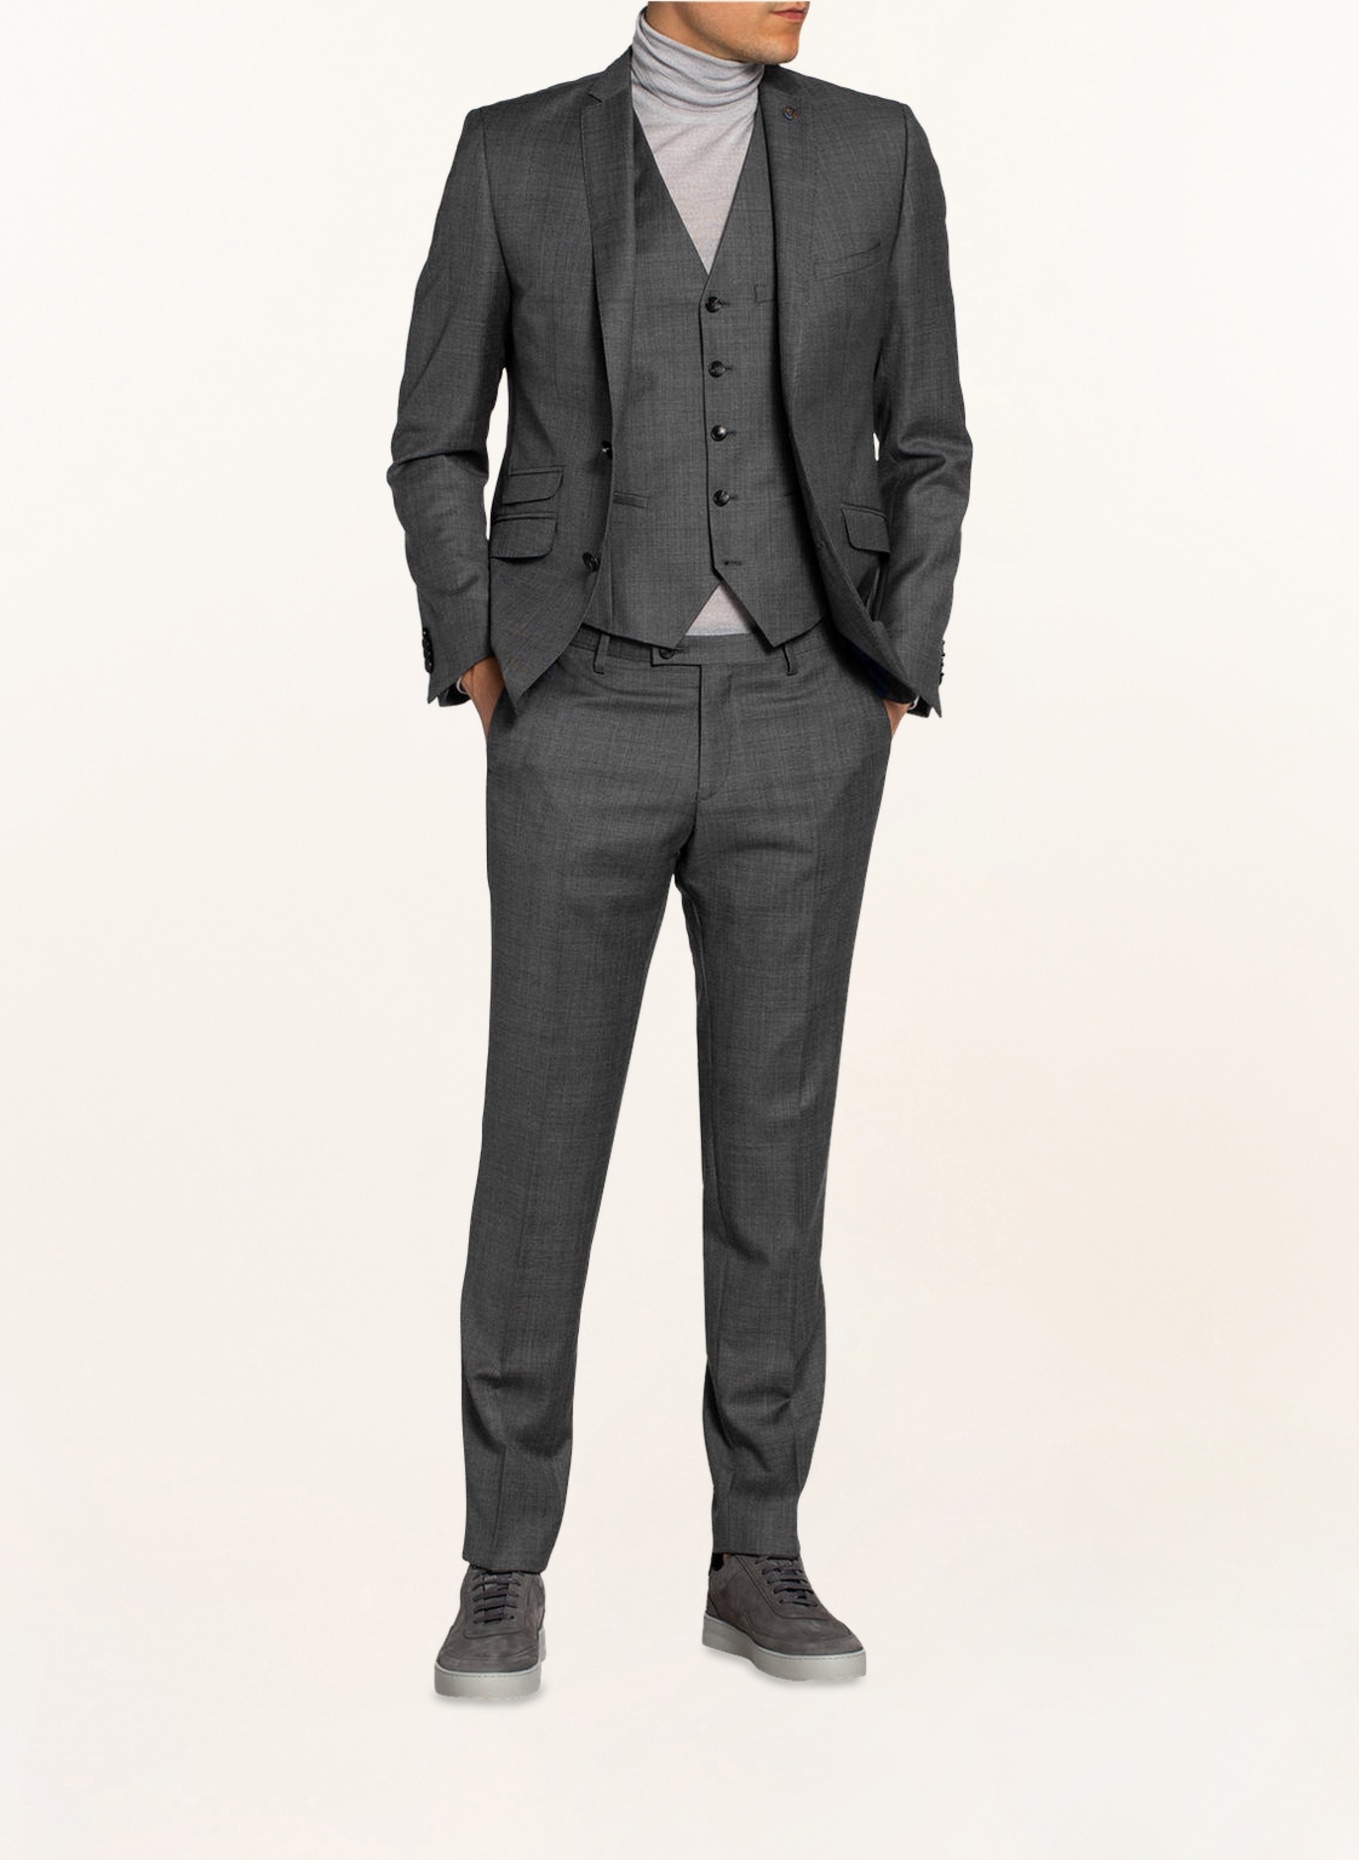 CG - CLUB of GENTS Suit trousers CHAZ regular fit, Color: 81 grau hell (Image 2)